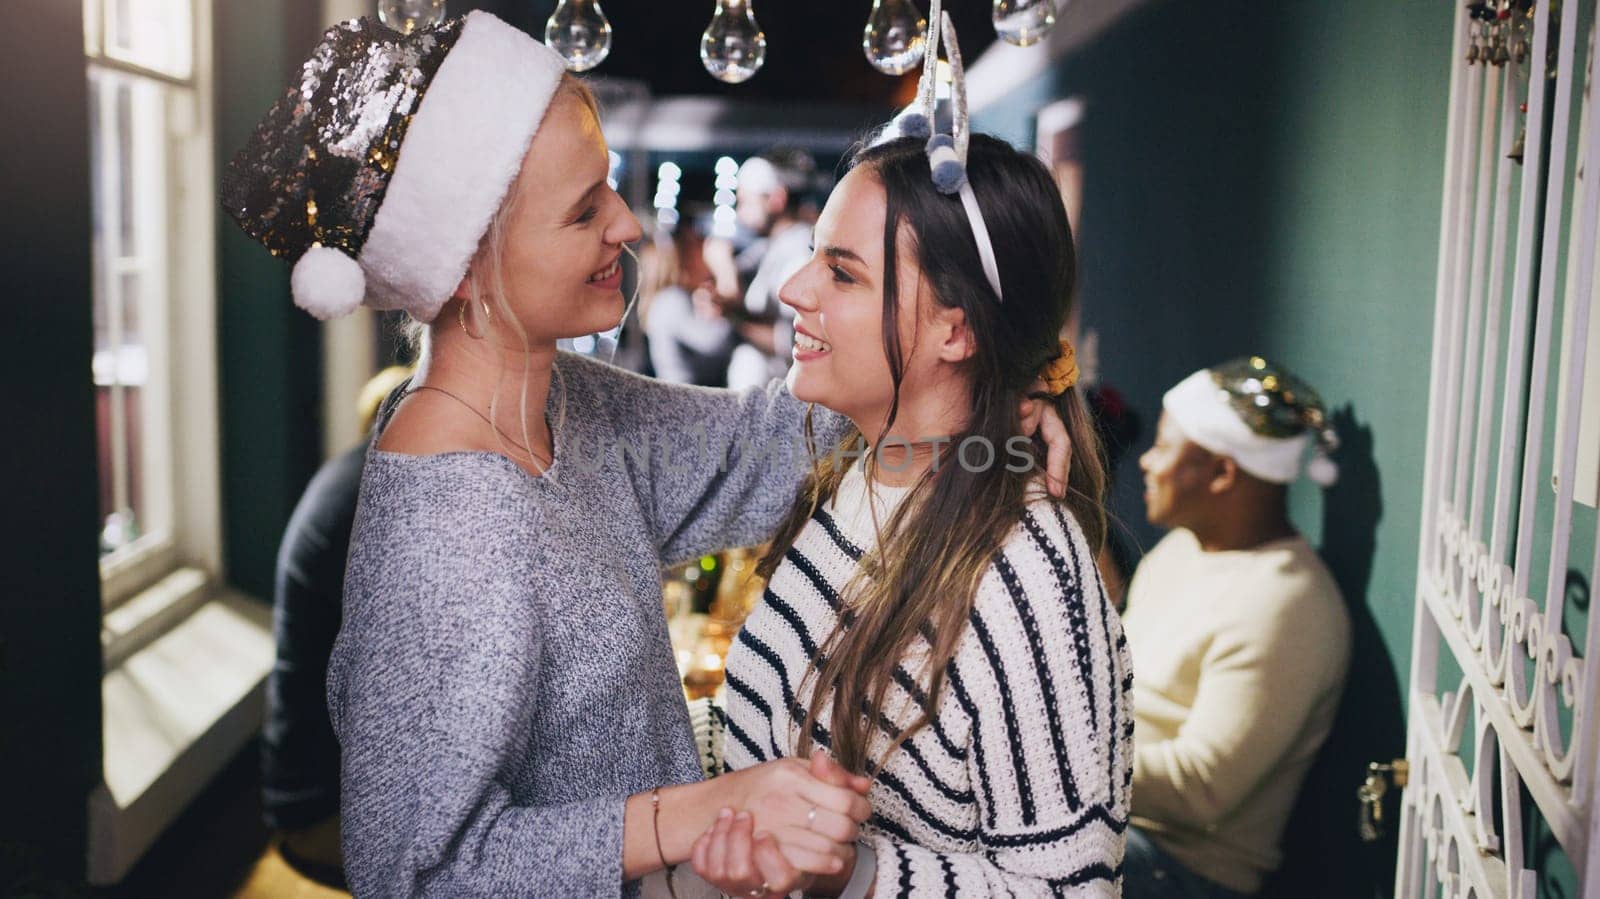 Lesbian couple, dance and Christmas party in home or festive celebration. Event, love and romance of women dancing face to face, holding hands and celebrating holiday together in house with friends